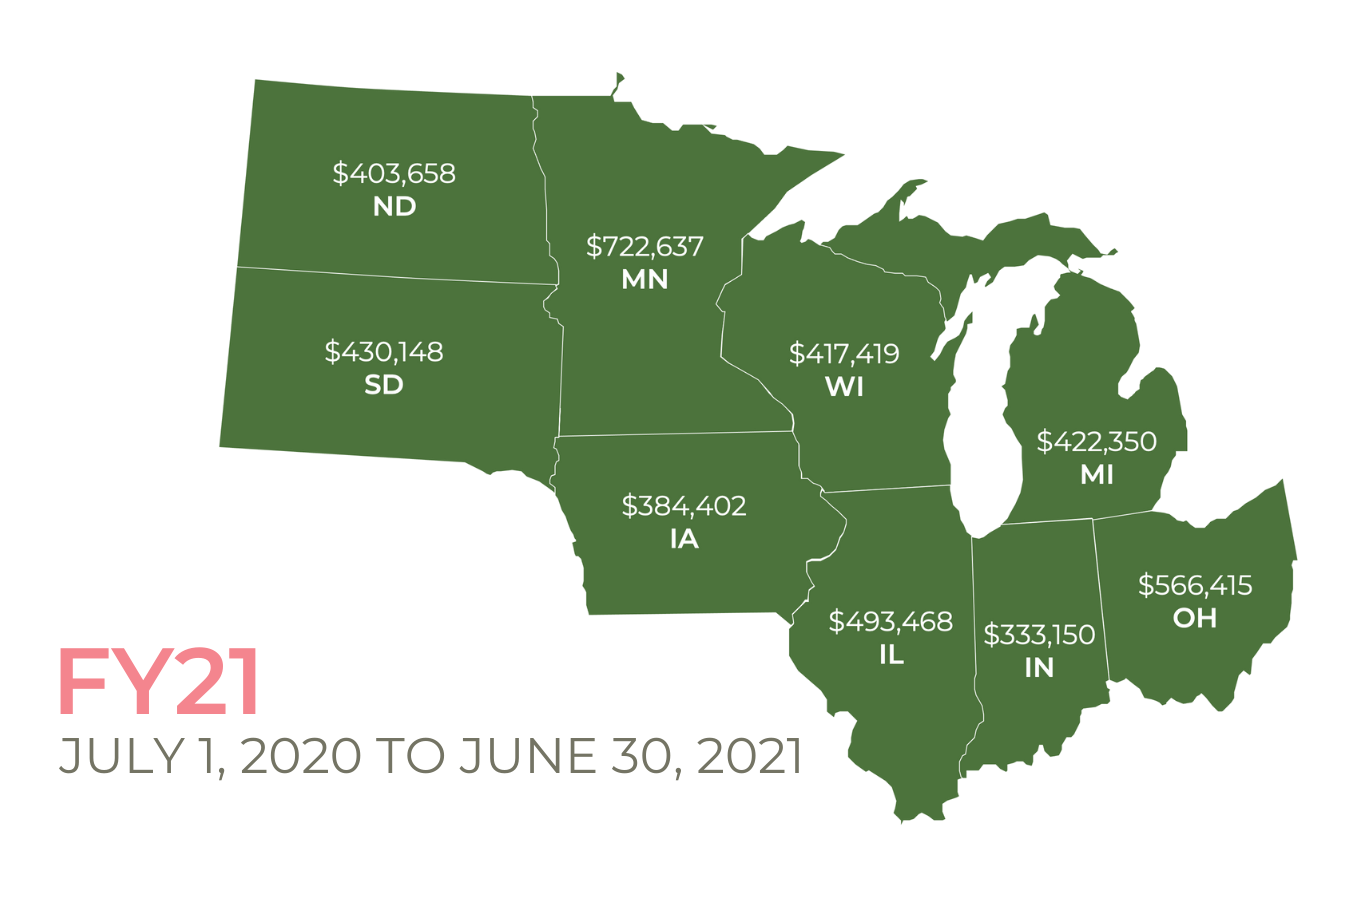 An illustration titled "FY21: July 1, 2020 to June 30, 2021." It shows the nine state region of ND, SD, MN, IA, WI, IL, IN, MI, and OH in green. Each state has a dollar amount associated with it to show Arts Midwest fiscal year 22 investment amounts to each state.